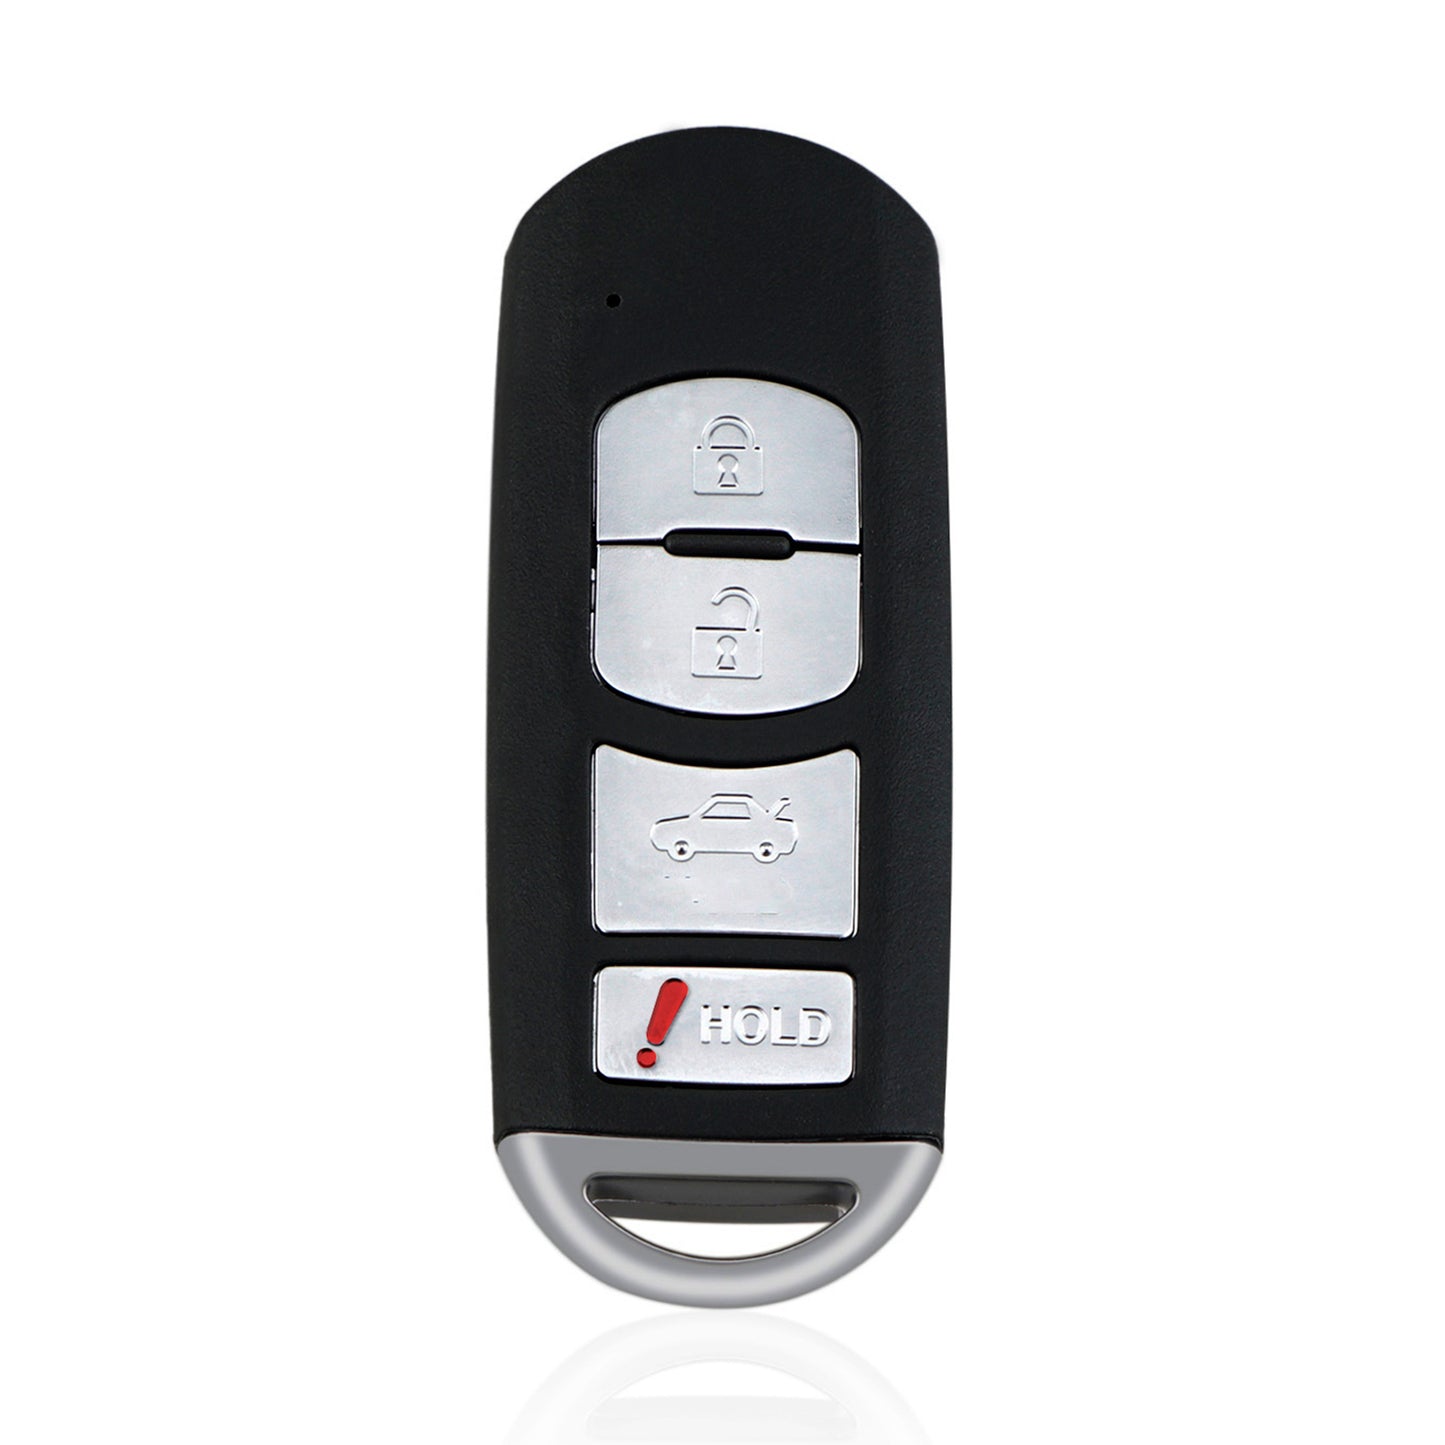 4 Buttons 315MHz Keyless Entry Fob Remote Car Key For 2010 - 2015 Mazda CX-7 CX-9 with Hatch Function FCC ID: WAZX1T763SKE11A04 SKU : J885